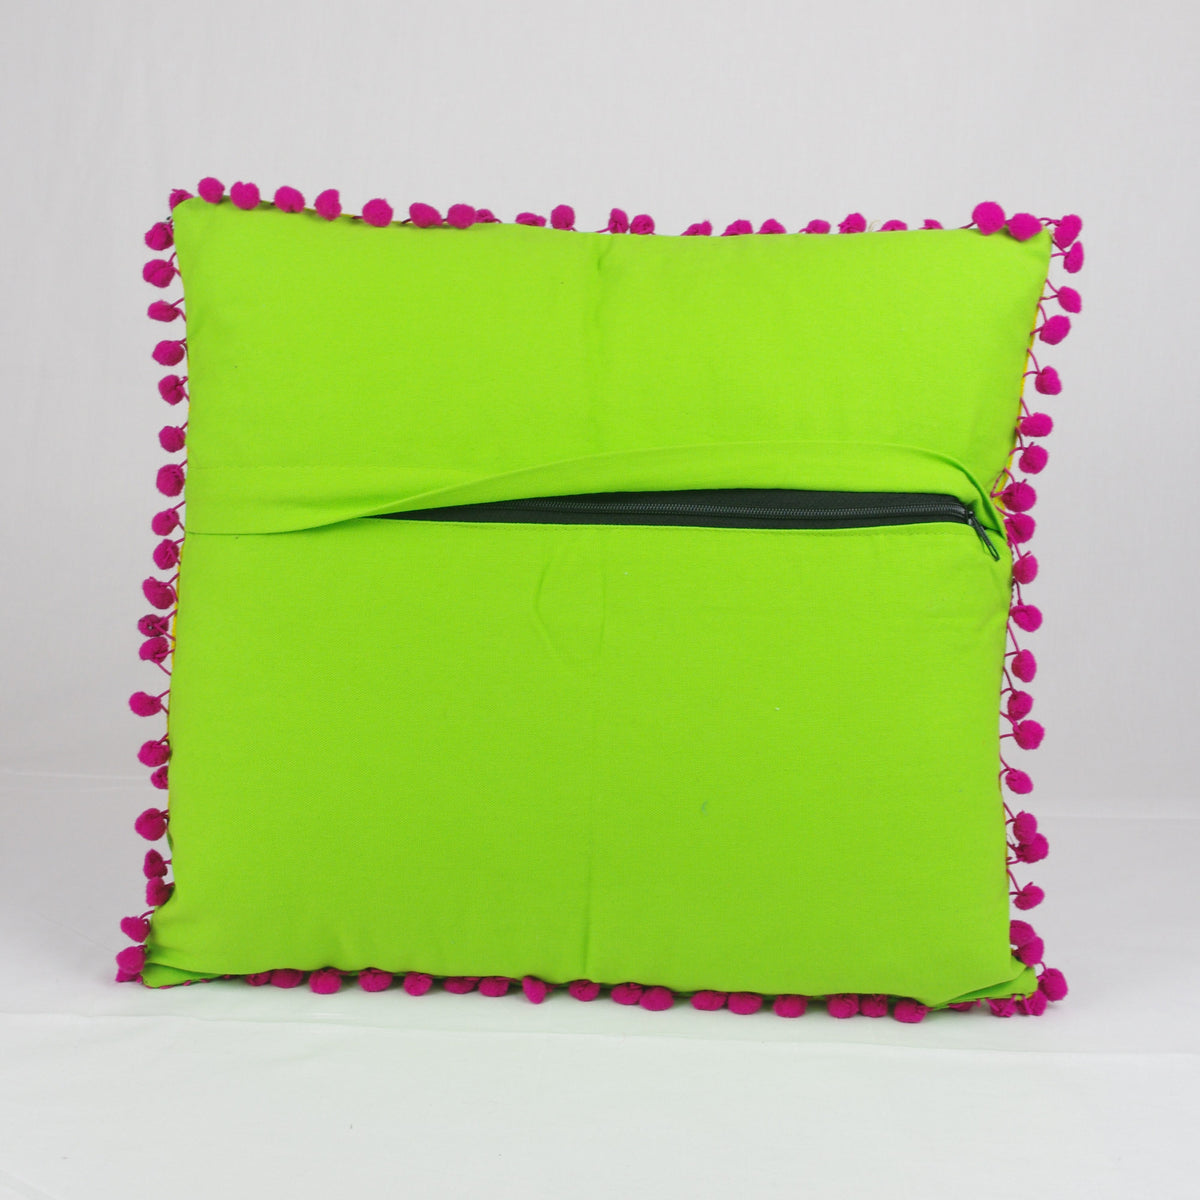 Suzani Woolen Embroidered Cotton Square Cushion Cover - Green